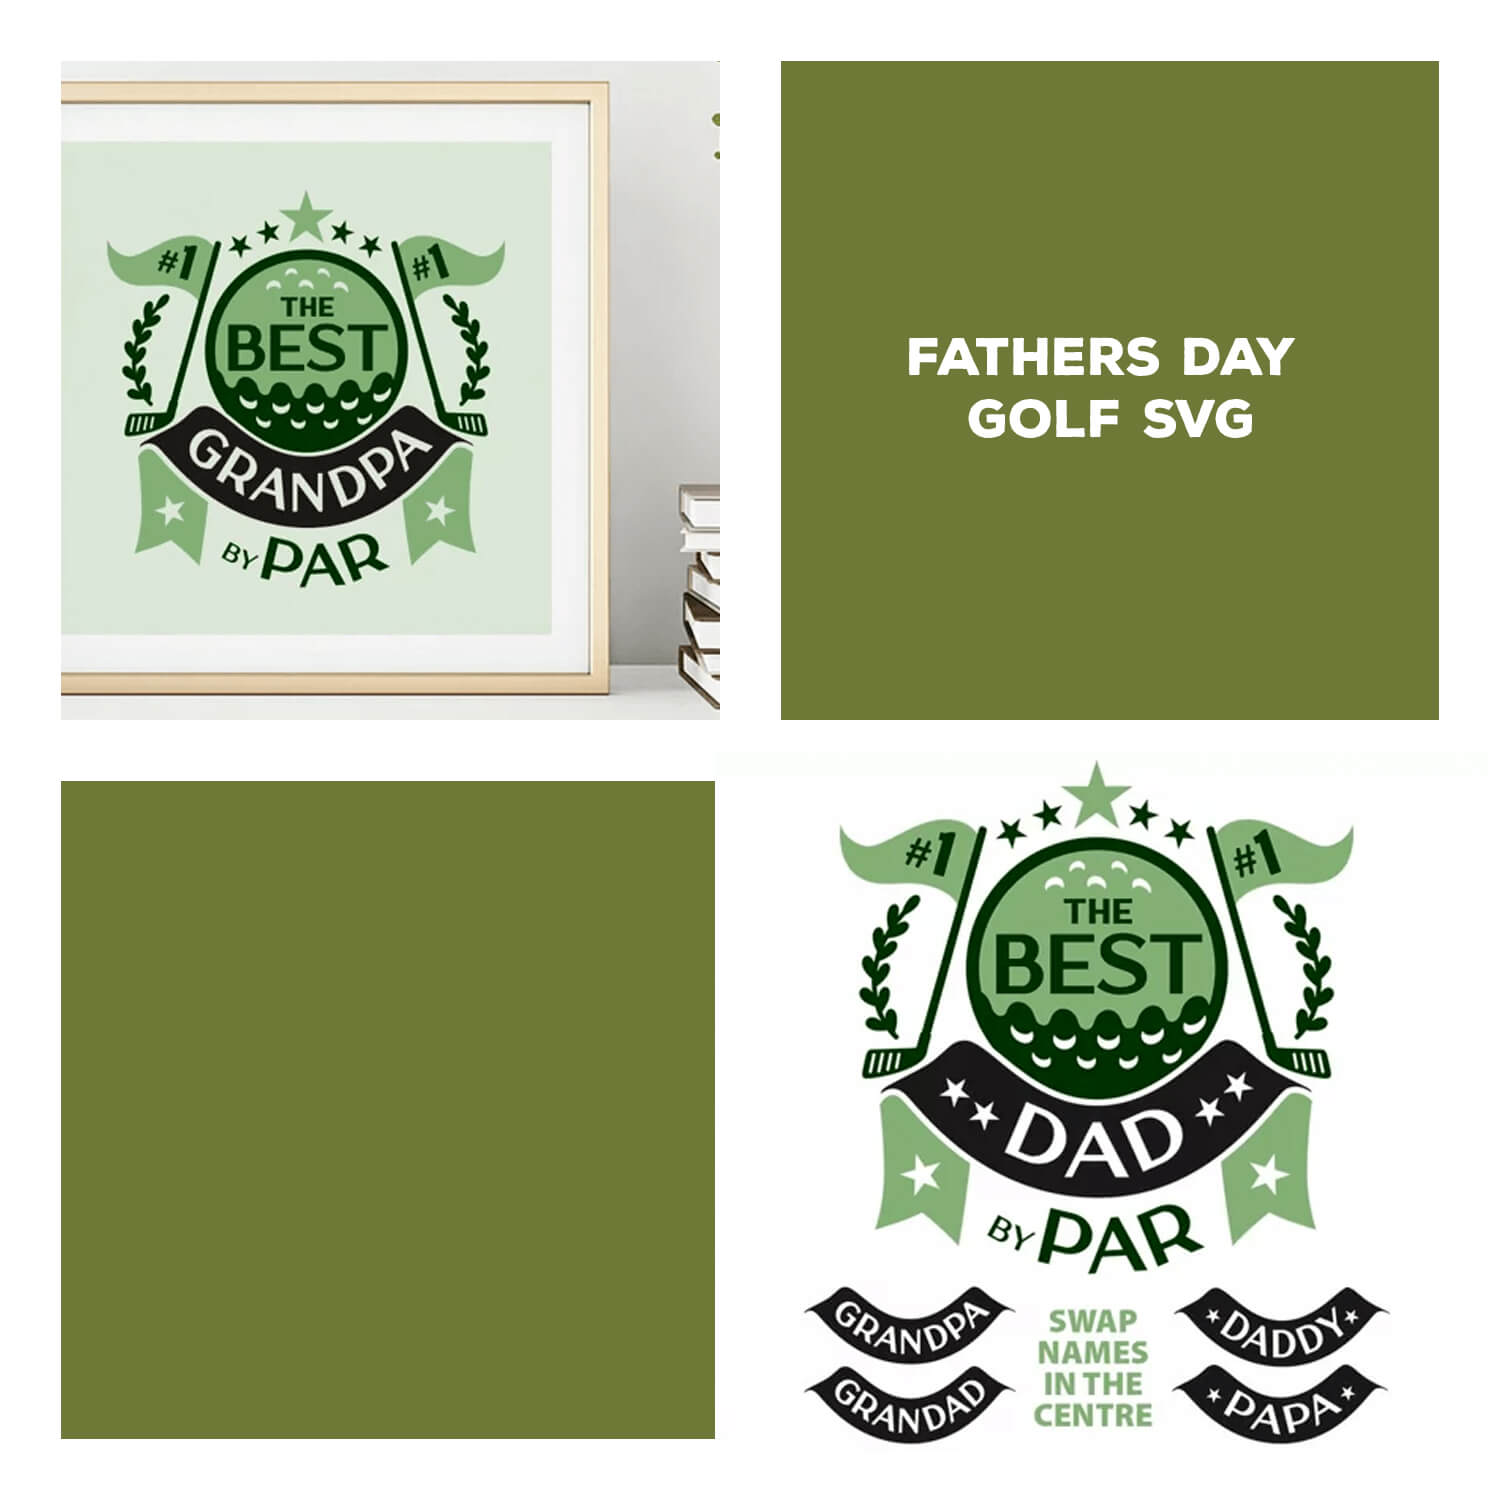 Four pictures in one, father's day logo framed and unframed.